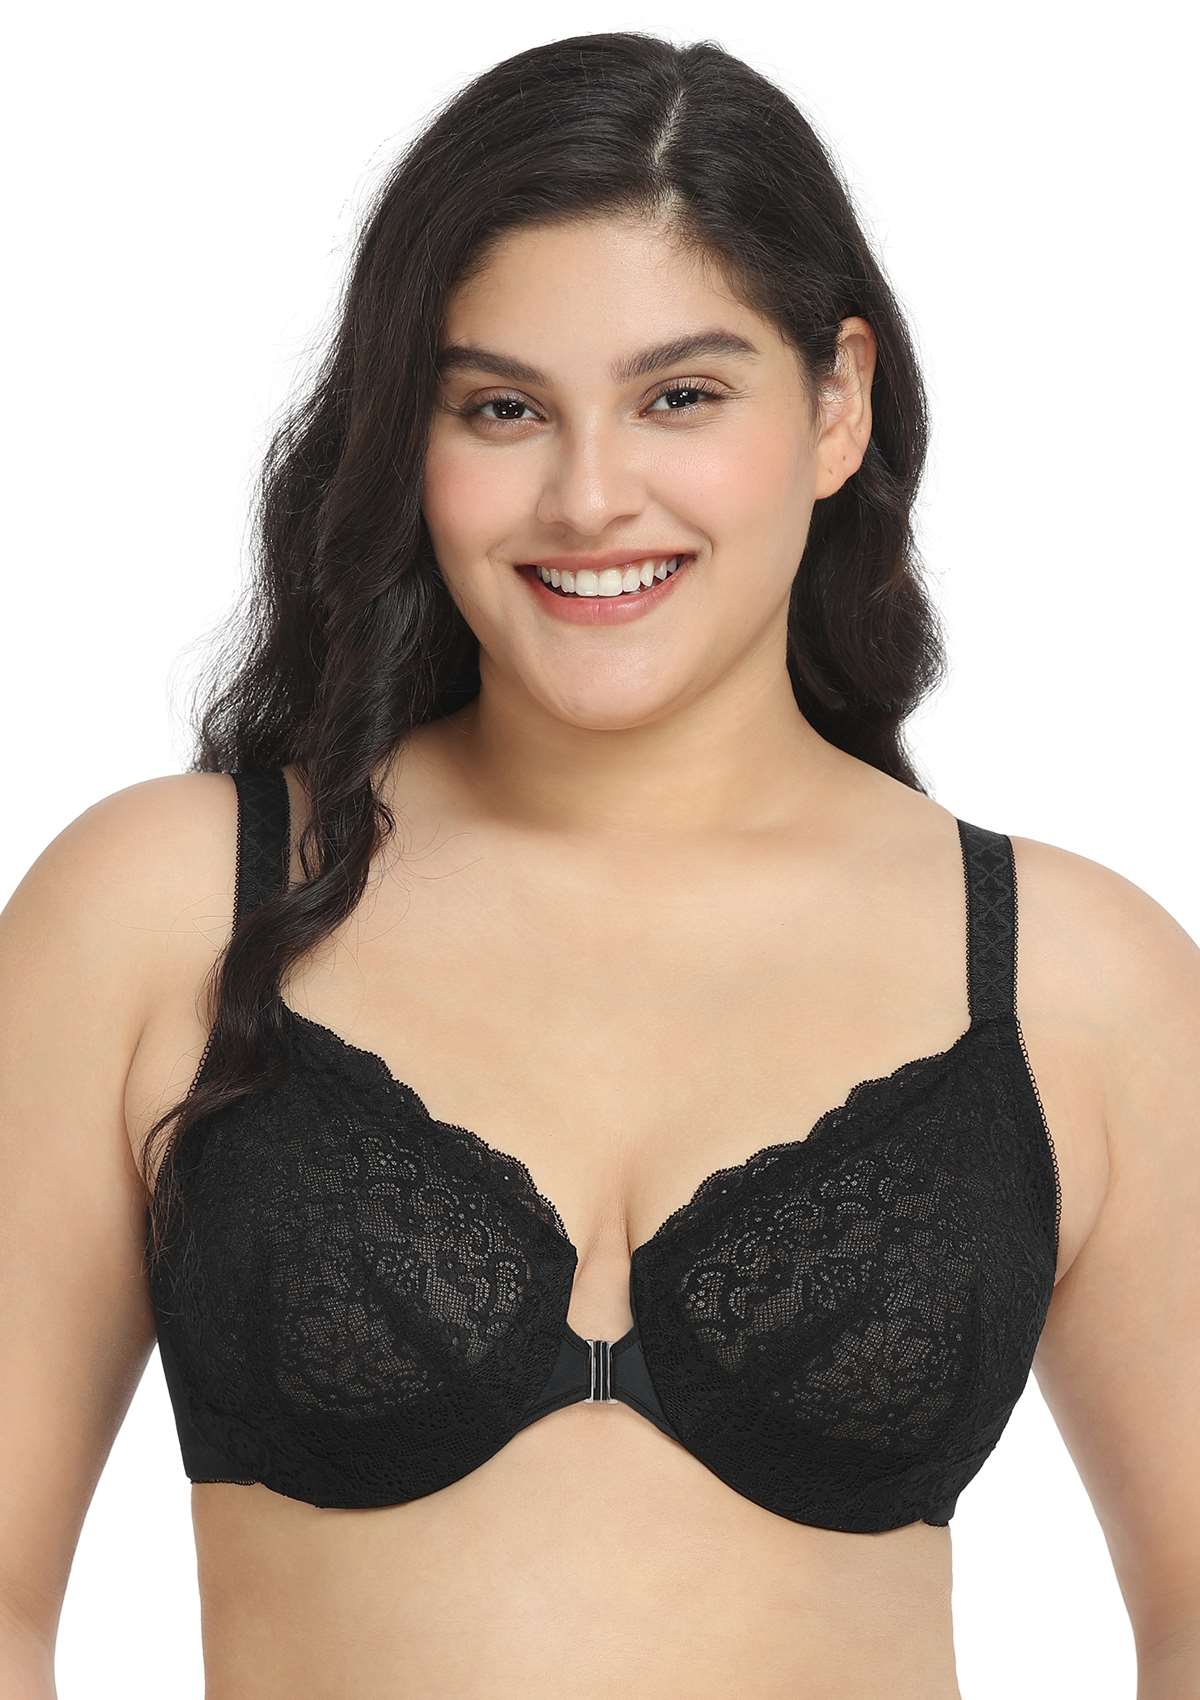 HSIA Nymphaea Front-Close Unlined Retro Floral Lace Back Smoothing Bra - Black / 44 / DDD/F